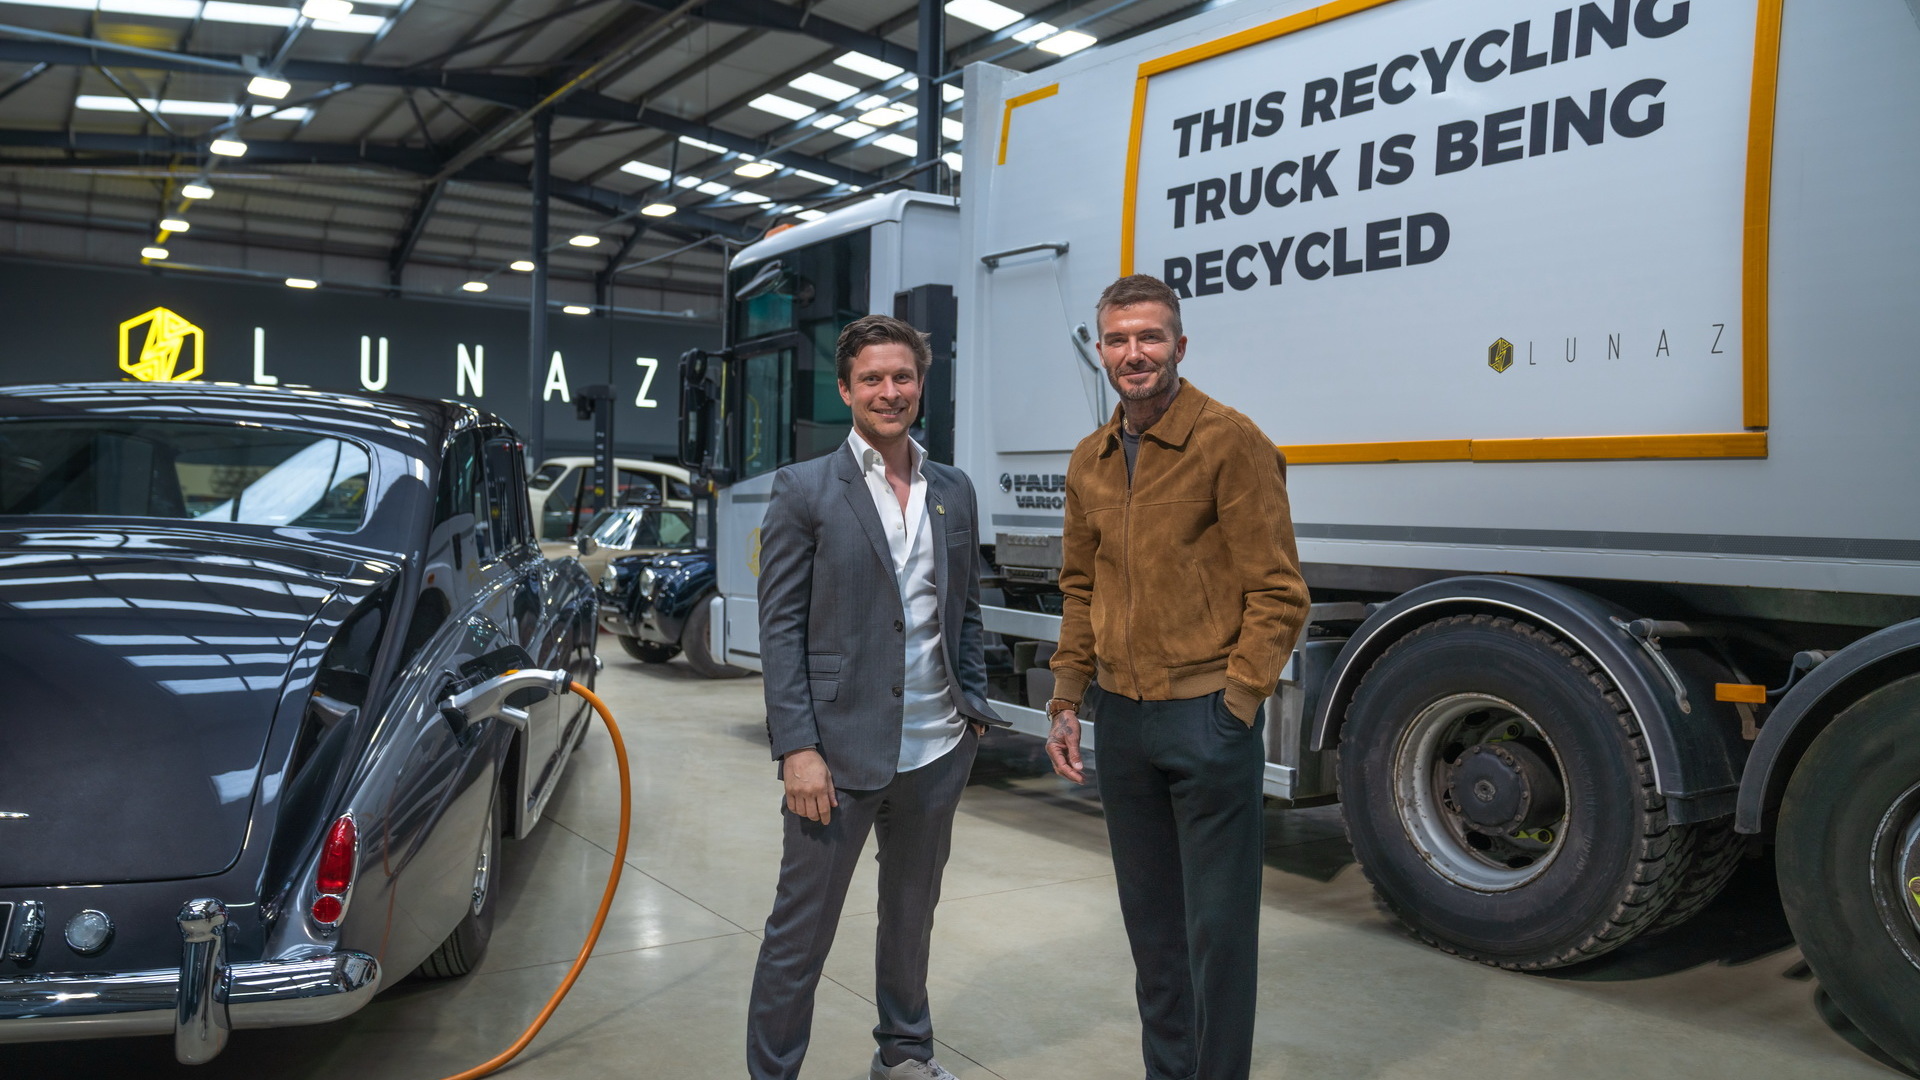 Lunaz upcycled recycling truck  -  based on Mercedes-Benz Econic garbage truck